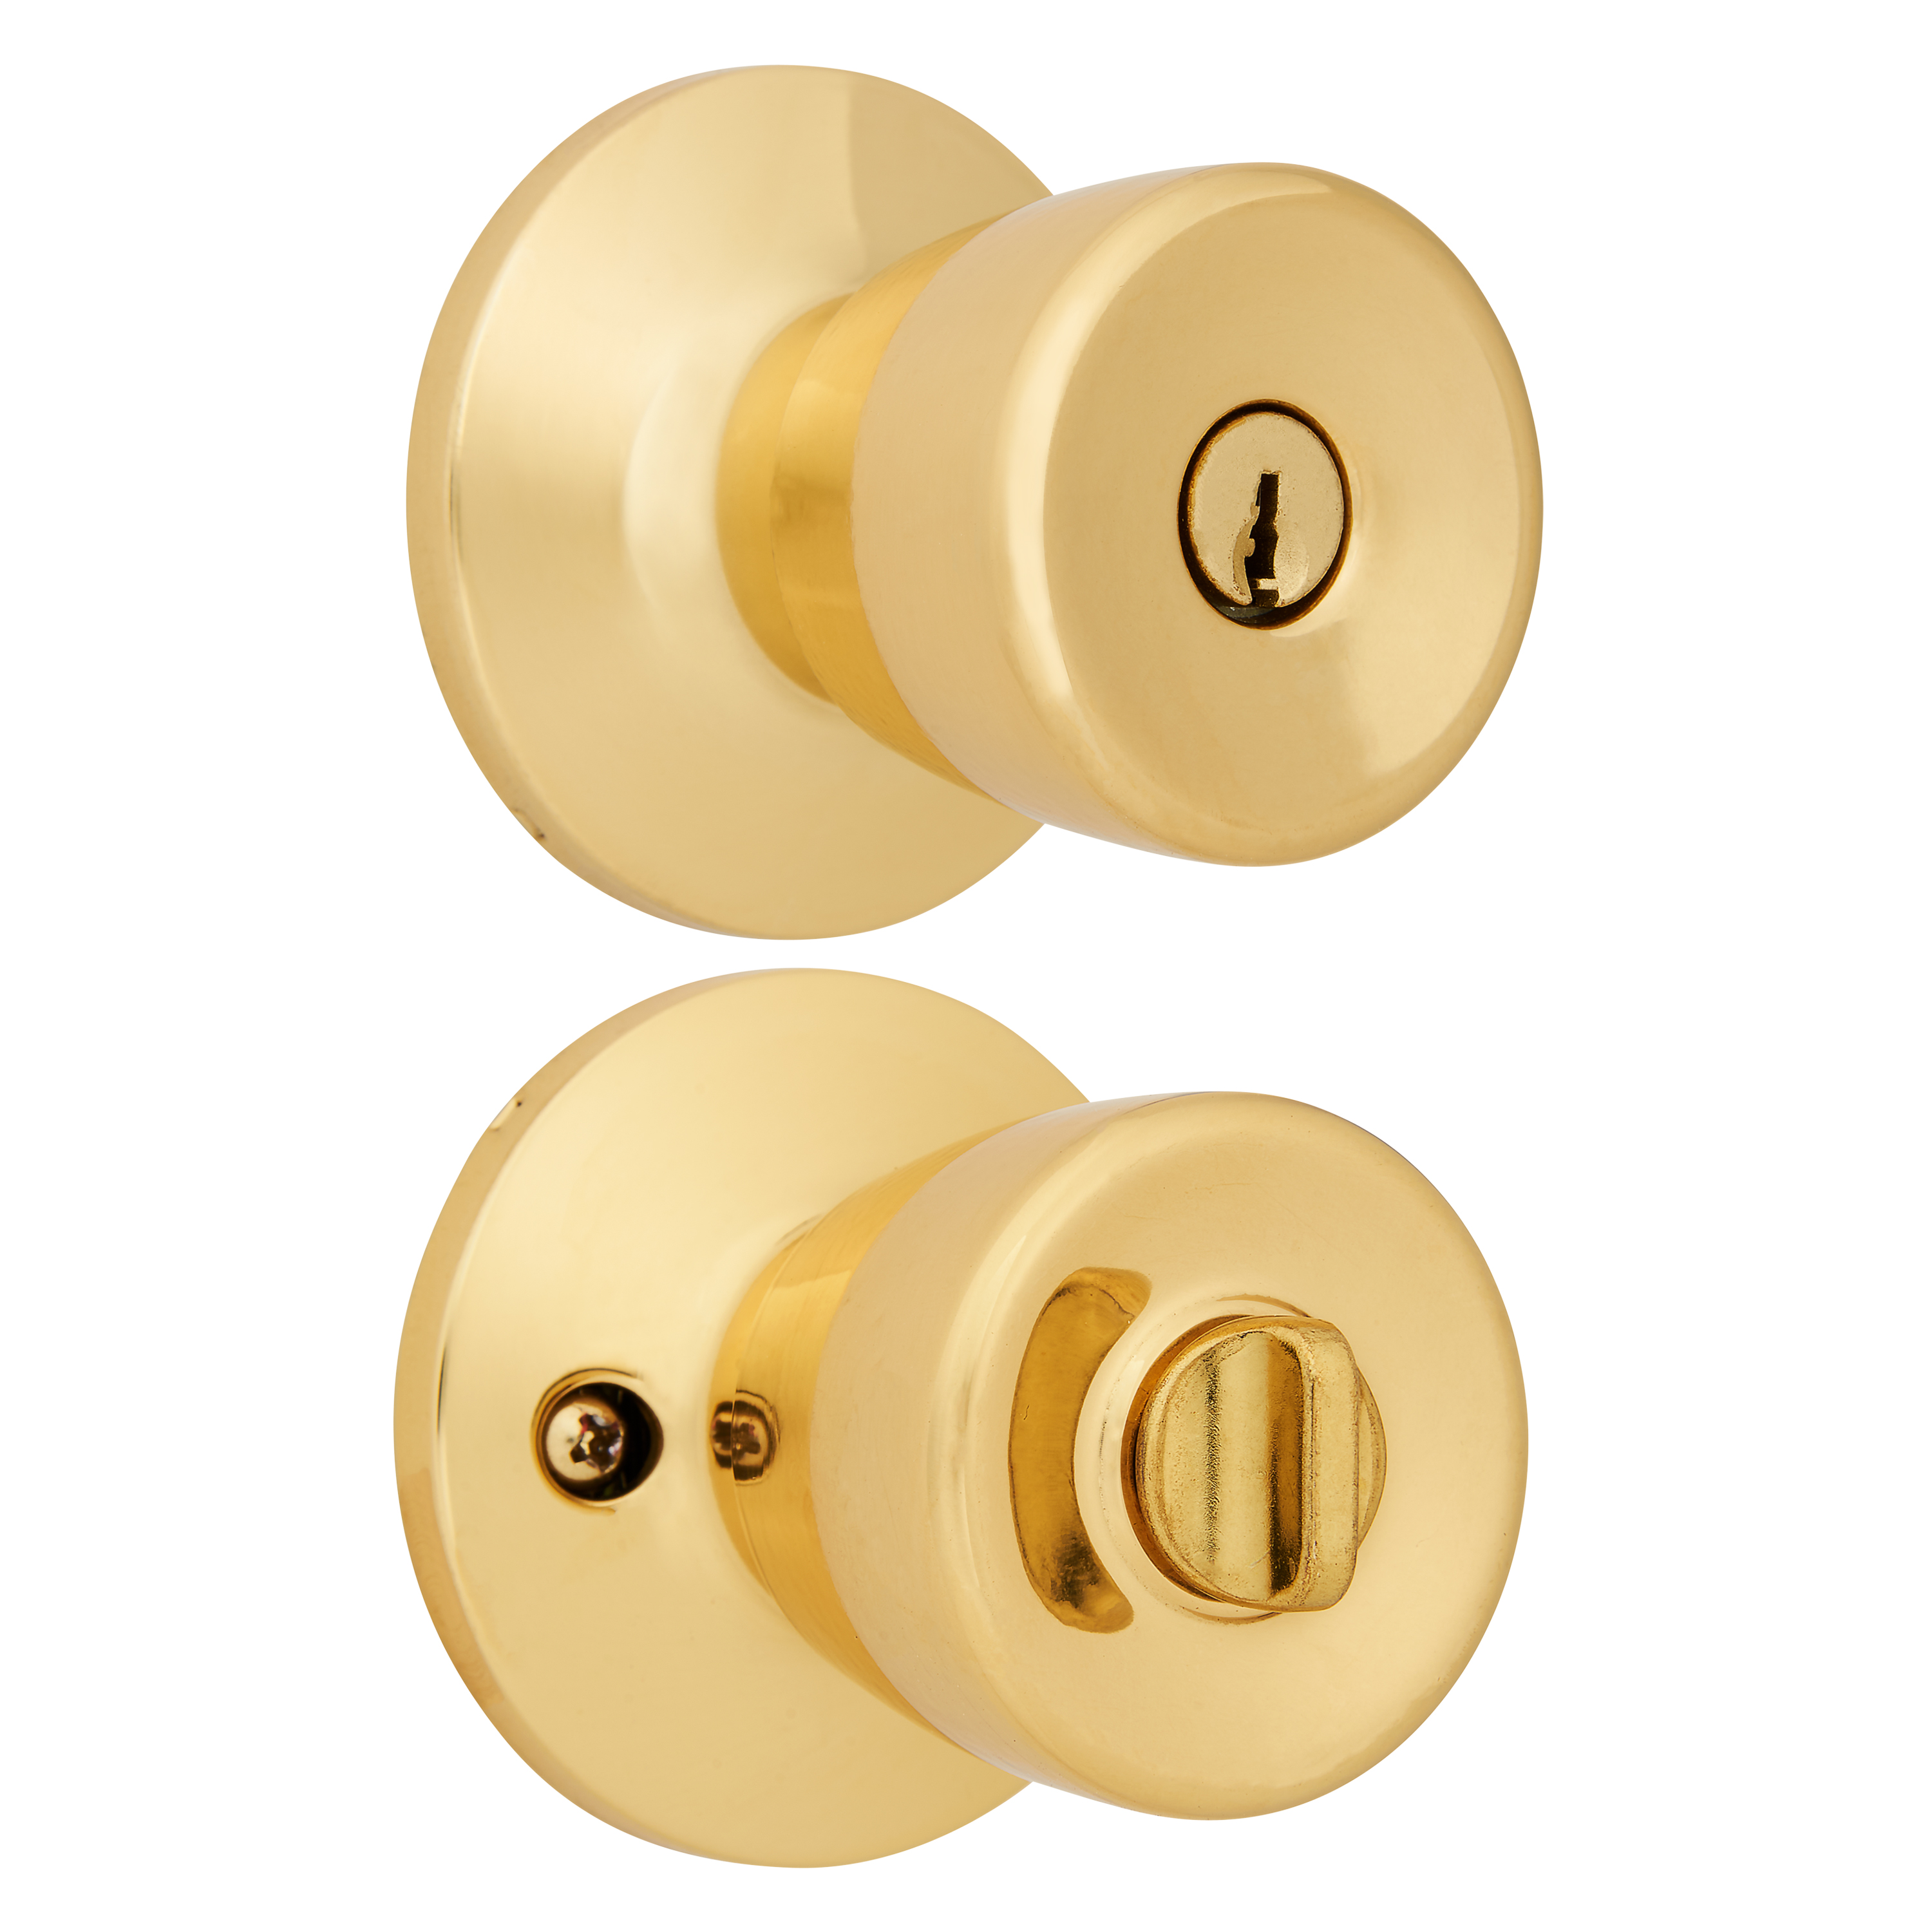 Brinks, Keyed Entry, Mobile Home Bell Style Doorknob, Polished Brass Finish - image 1 of 11